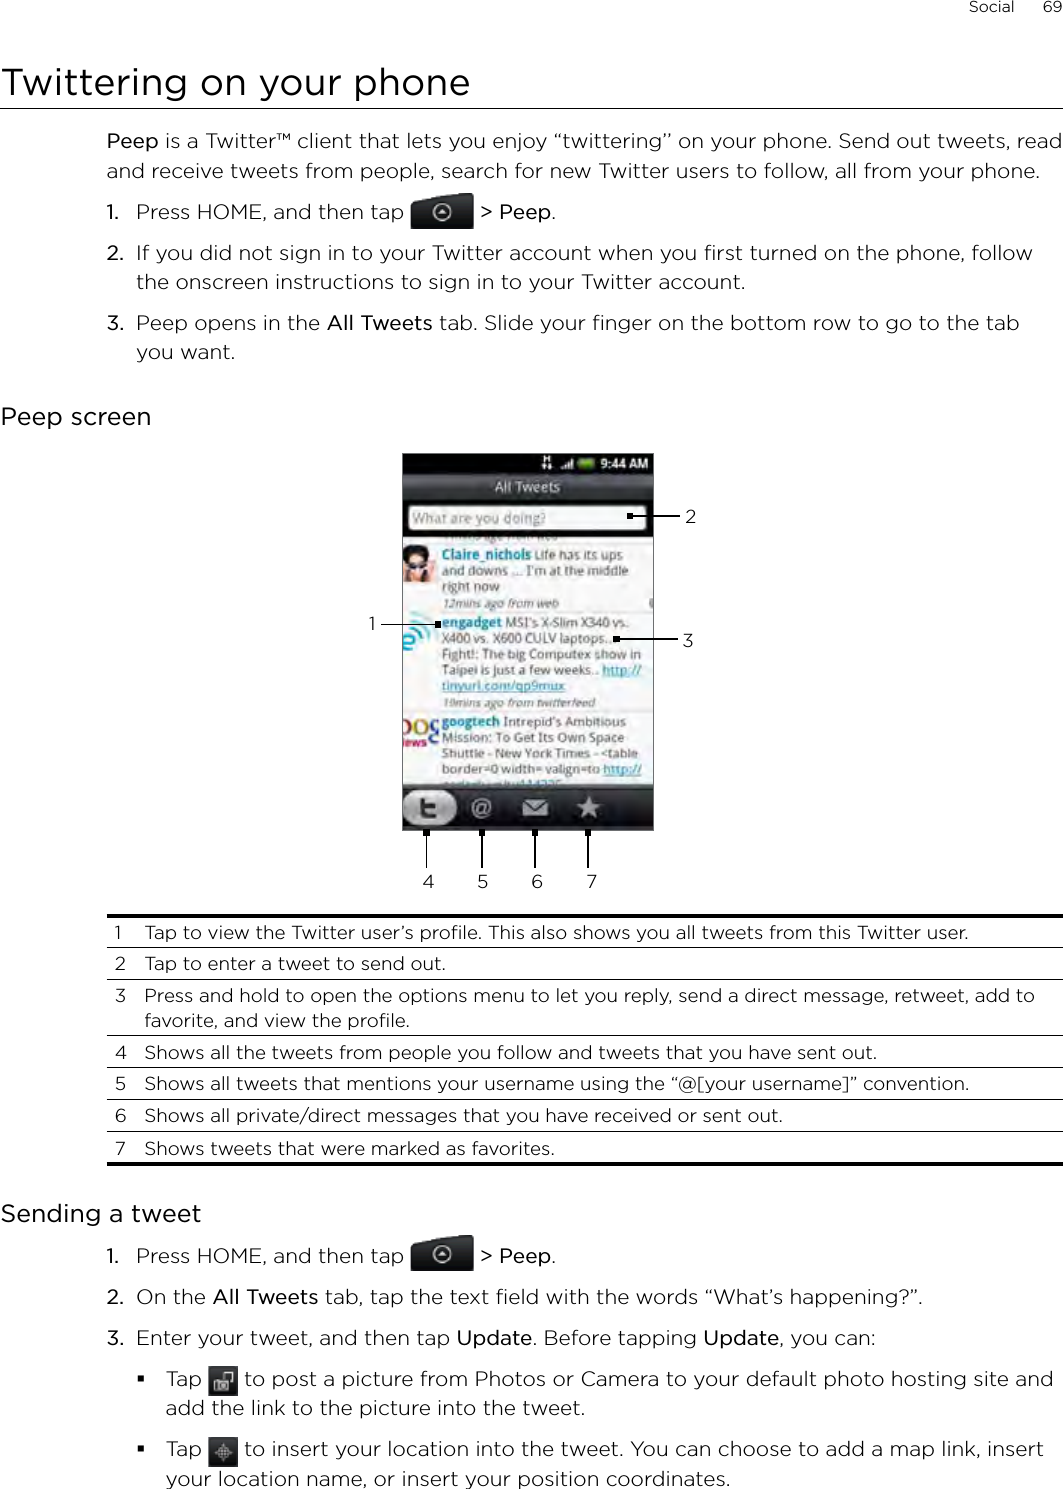 Social      69Twittering on your phonePeep is a Twitter™ client that lets you enjoy “twittering’’ on your phone. Send out tweets, read and receive tweets from people, search for new Twitter users to follow, all from your phone.1.  Press HOME, and then tap  &gt; Peep.2.  If you did not sign in to your Twitter account when you first turned on the phone, follow the onscreen instructions to sign in to your Twitter account.3.  Peep opens in the All Tweets tab. Slide your finger on the bottom row to go to the tab you want.Peep screen234 5 6 711  Tap to view the Twitter user’s profile. This also shows you all tweets from this Twitter user. 2  Tap to enter a tweet to send out. 3  Press and hold to open the options menu to let you reply, send a direct message, retweet, add to favorite, and view the profile.4  Shows all the tweets from people you follow and tweets that you have sent out. 5  Shows all tweets that mentions your username using the “@[your username]” convention. 6  Shows all private/direct messages that you have received or sent out. 7  Shows tweets that were marked as favorites.Sending a tweetPress HOME, and then tap  &gt; Peep.On the All Tweets tab, tap the text field with the words “What’s happening?”.    Enter your tweet, and then tap Update. Before tapping Update, you can: Tap   to post a picture from Photos or Camera to your default photo hosting site and add the link to the picture into the tweet.Tap   to insert your location into the tweet. You can choose to add a map link, insert your location name, or insert your position coordinates.1.2.3.